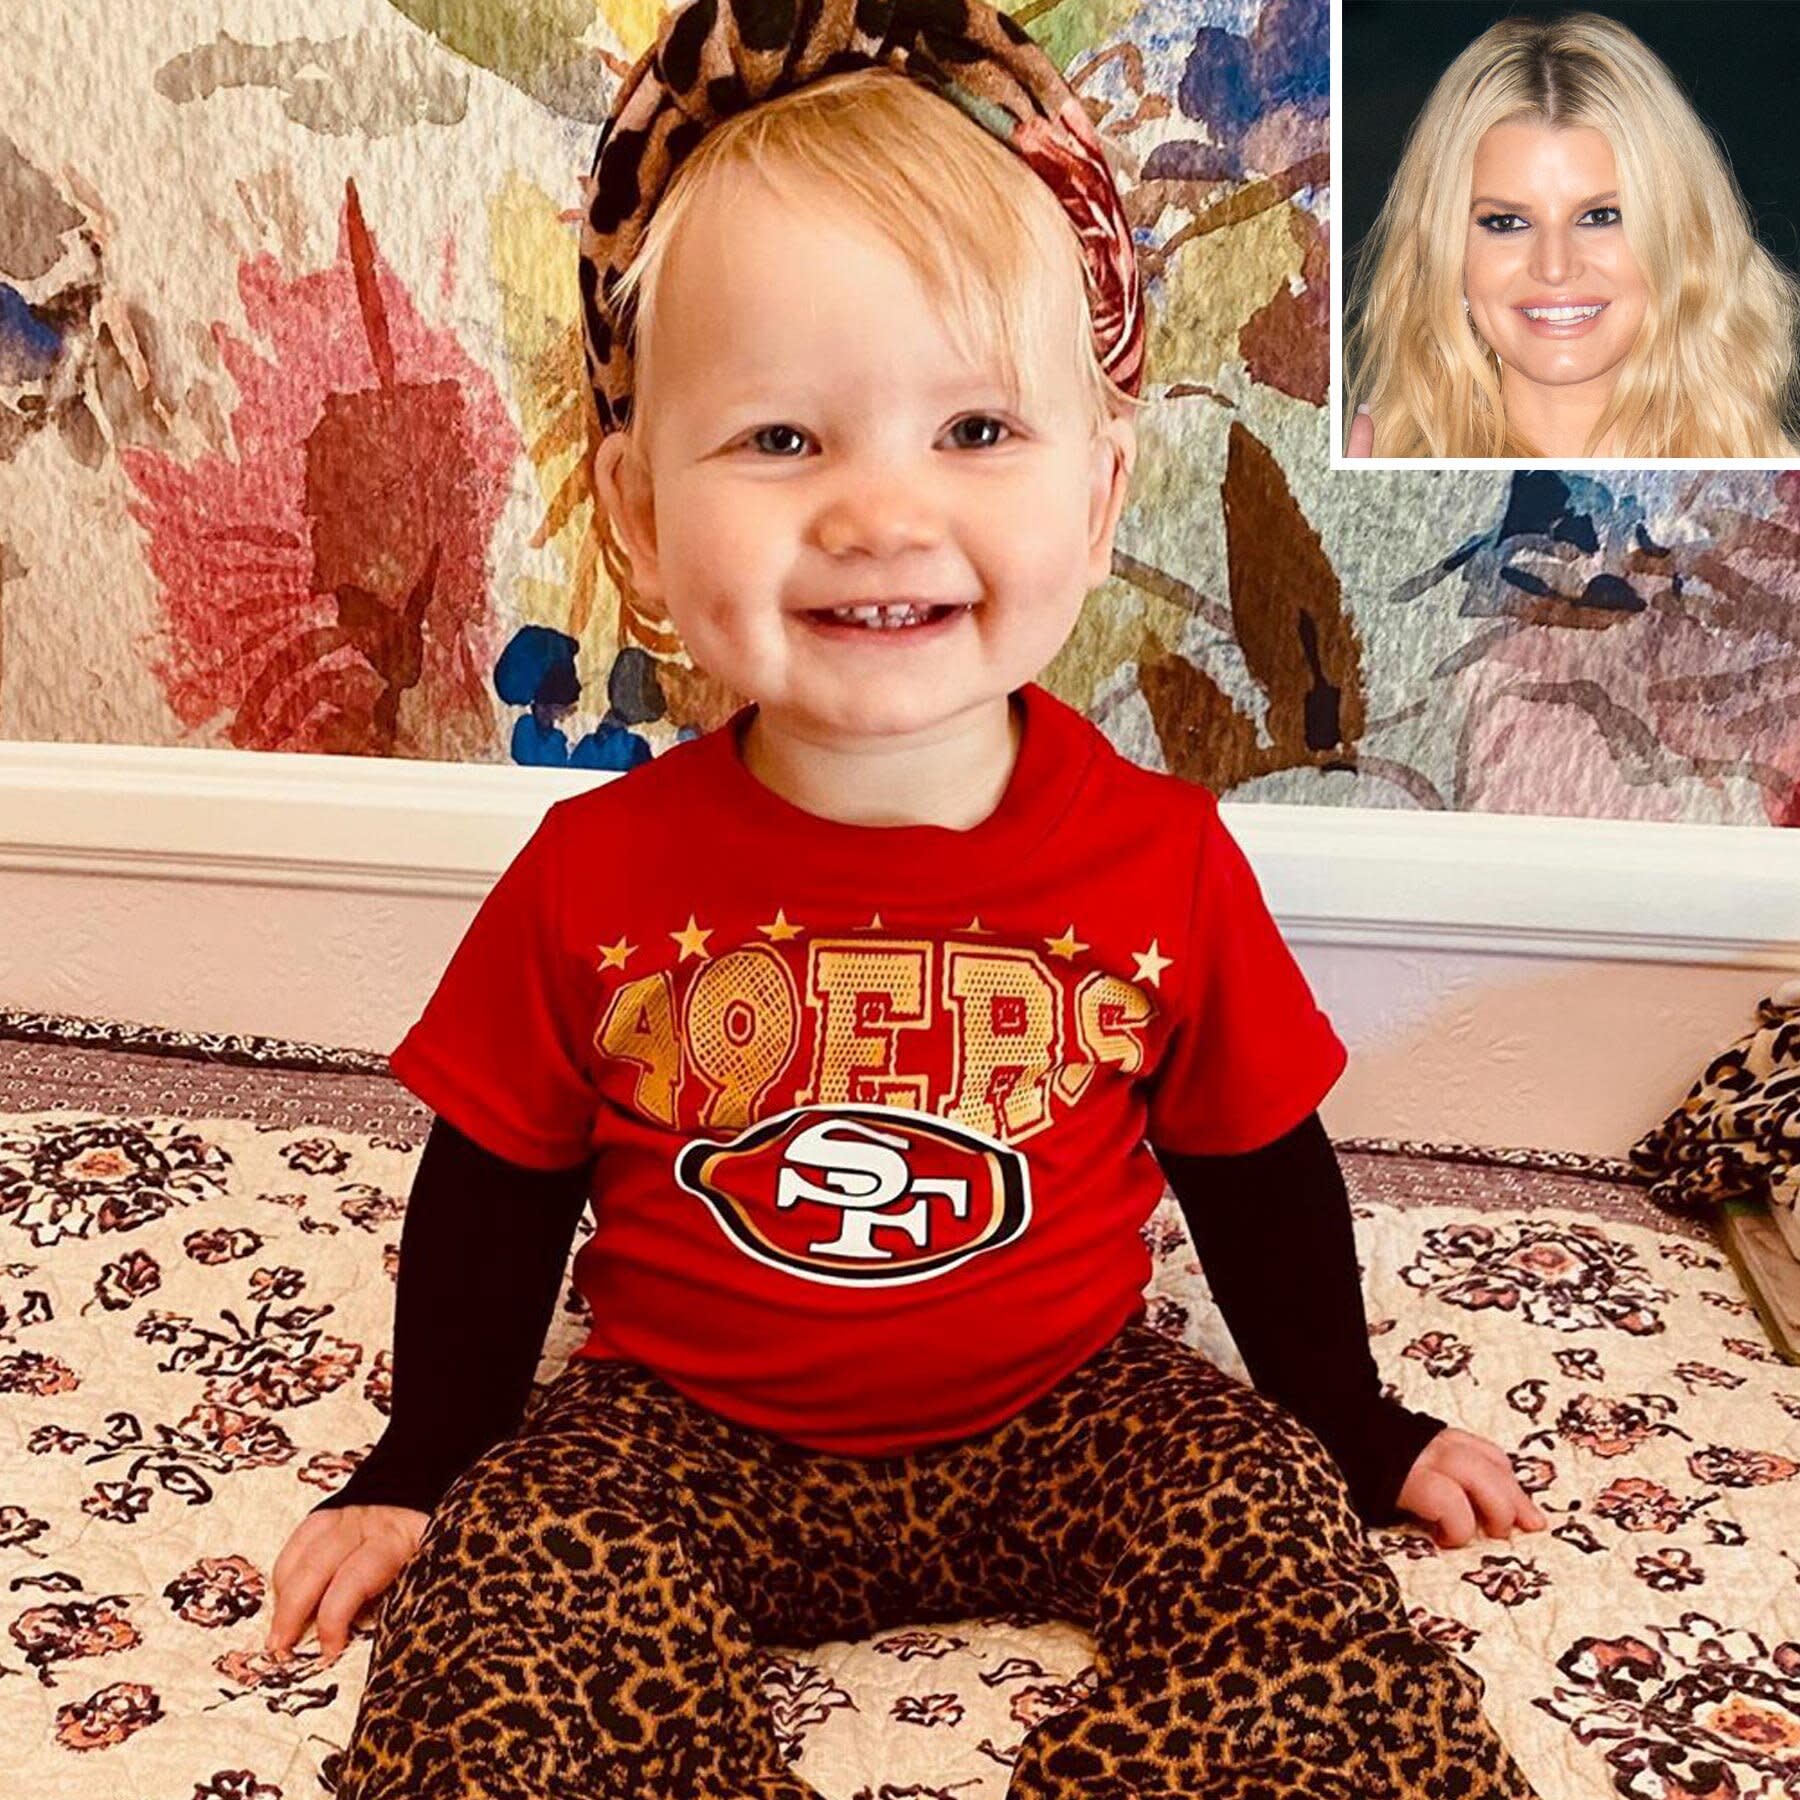 Jessica Simpson S Daughter Birdie Is The Cutest San Francisco 49ers Fan